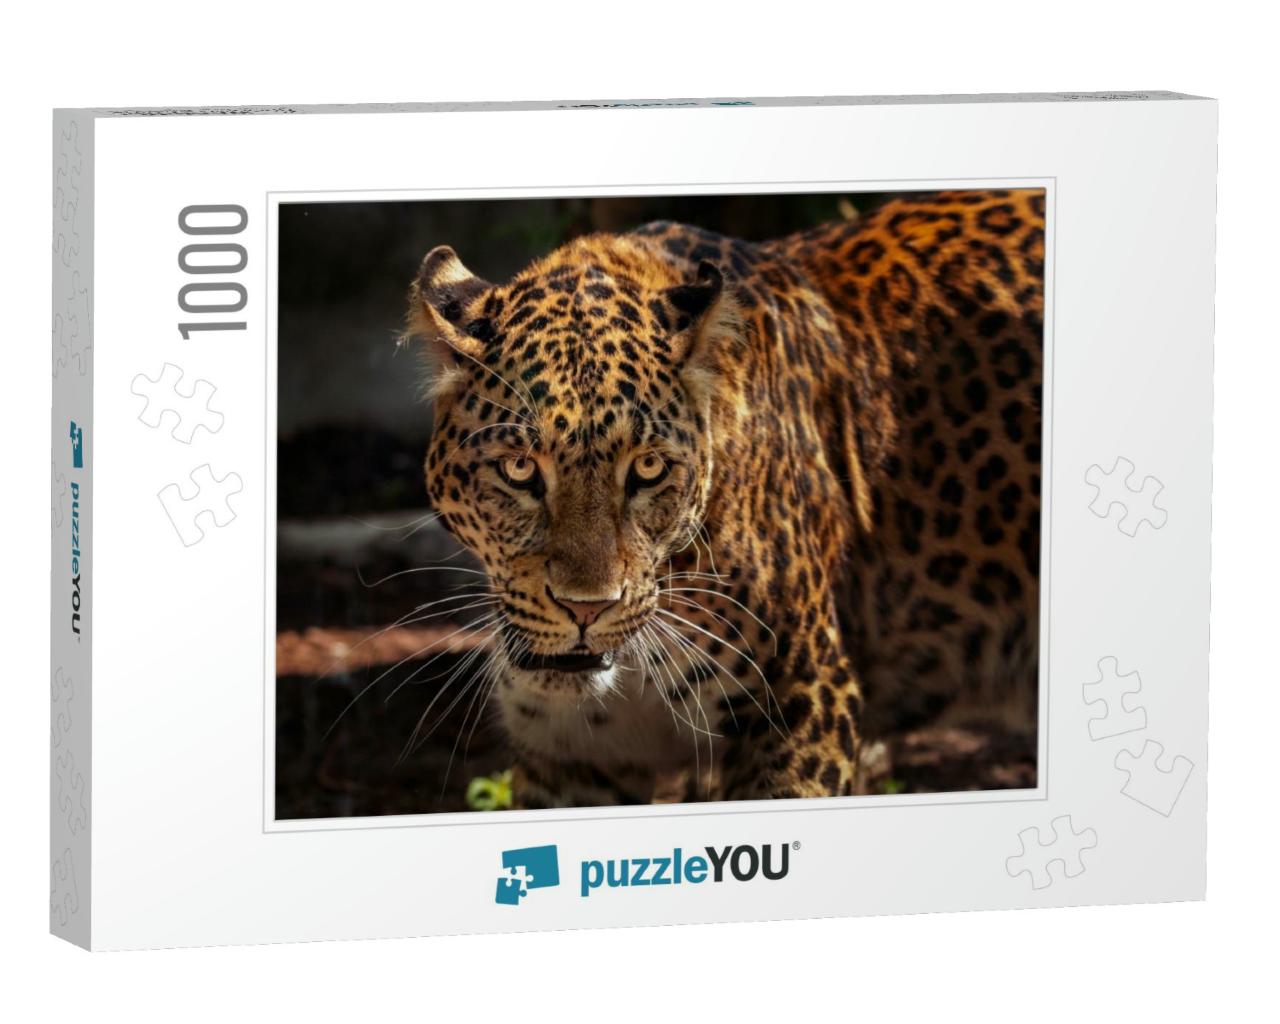 Attractive Image of a Powerful Hunter Jaguar... Jigsaw Puzzle with 1000 pieces